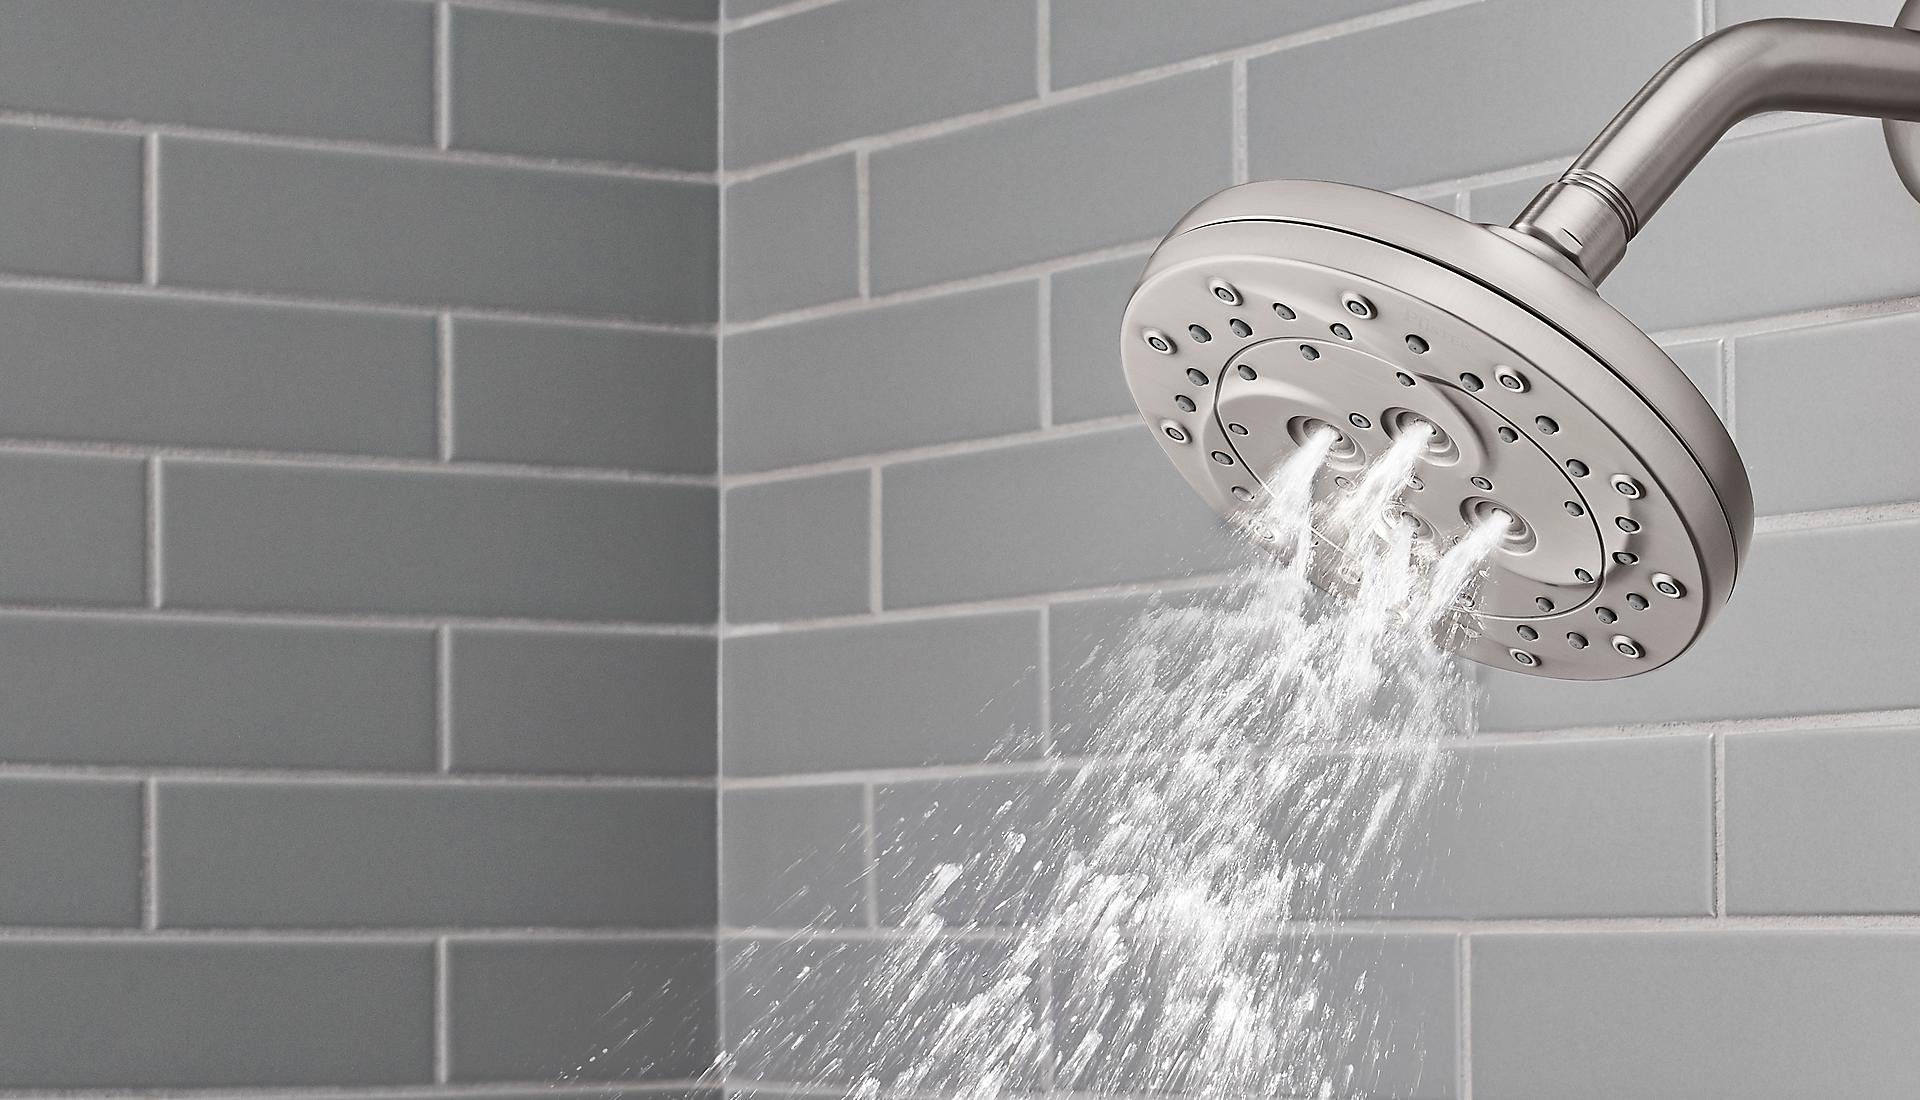 Thermoforce - Ready to take showering to the next level